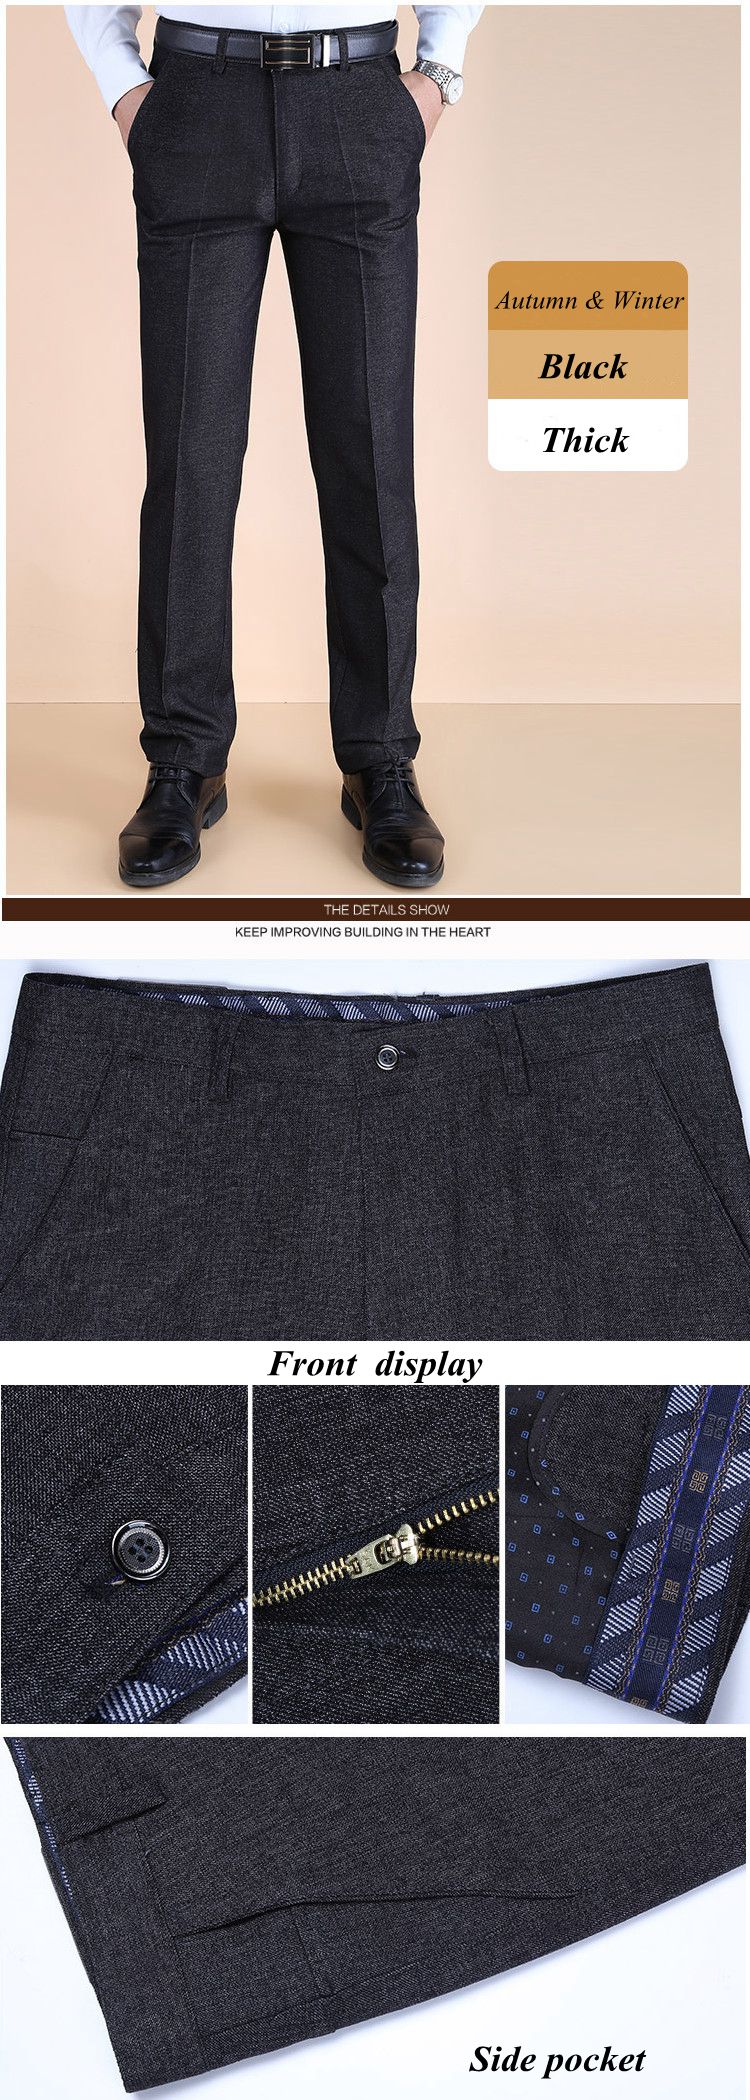 Autumn-Winter-Thick-Straight-Business-High-Waisted-Trousers-Mens-Casual-Suit-Pants-1256105